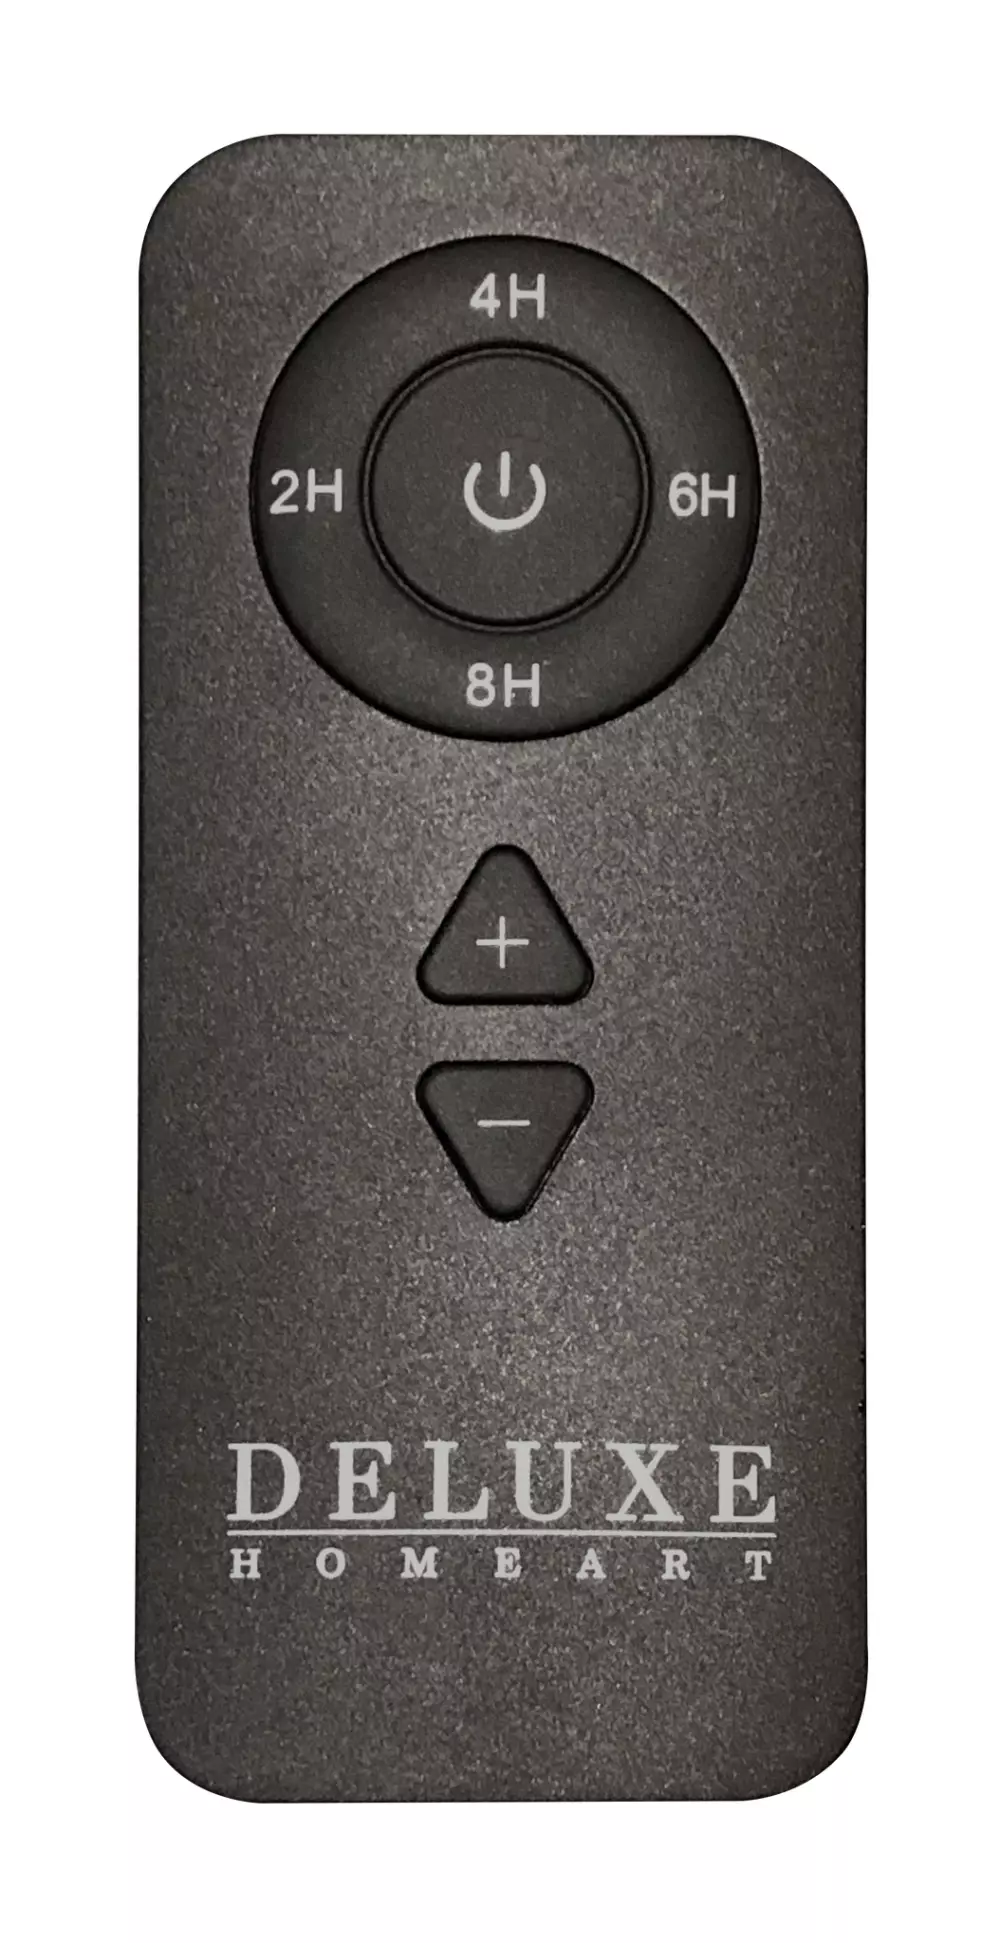 DeluxeHomeart Fjernkontroll, 0745114424044, FB-0001, Interiør, Lys, Deluxe Homeart, Remote Control 2/4/6/8H Timer